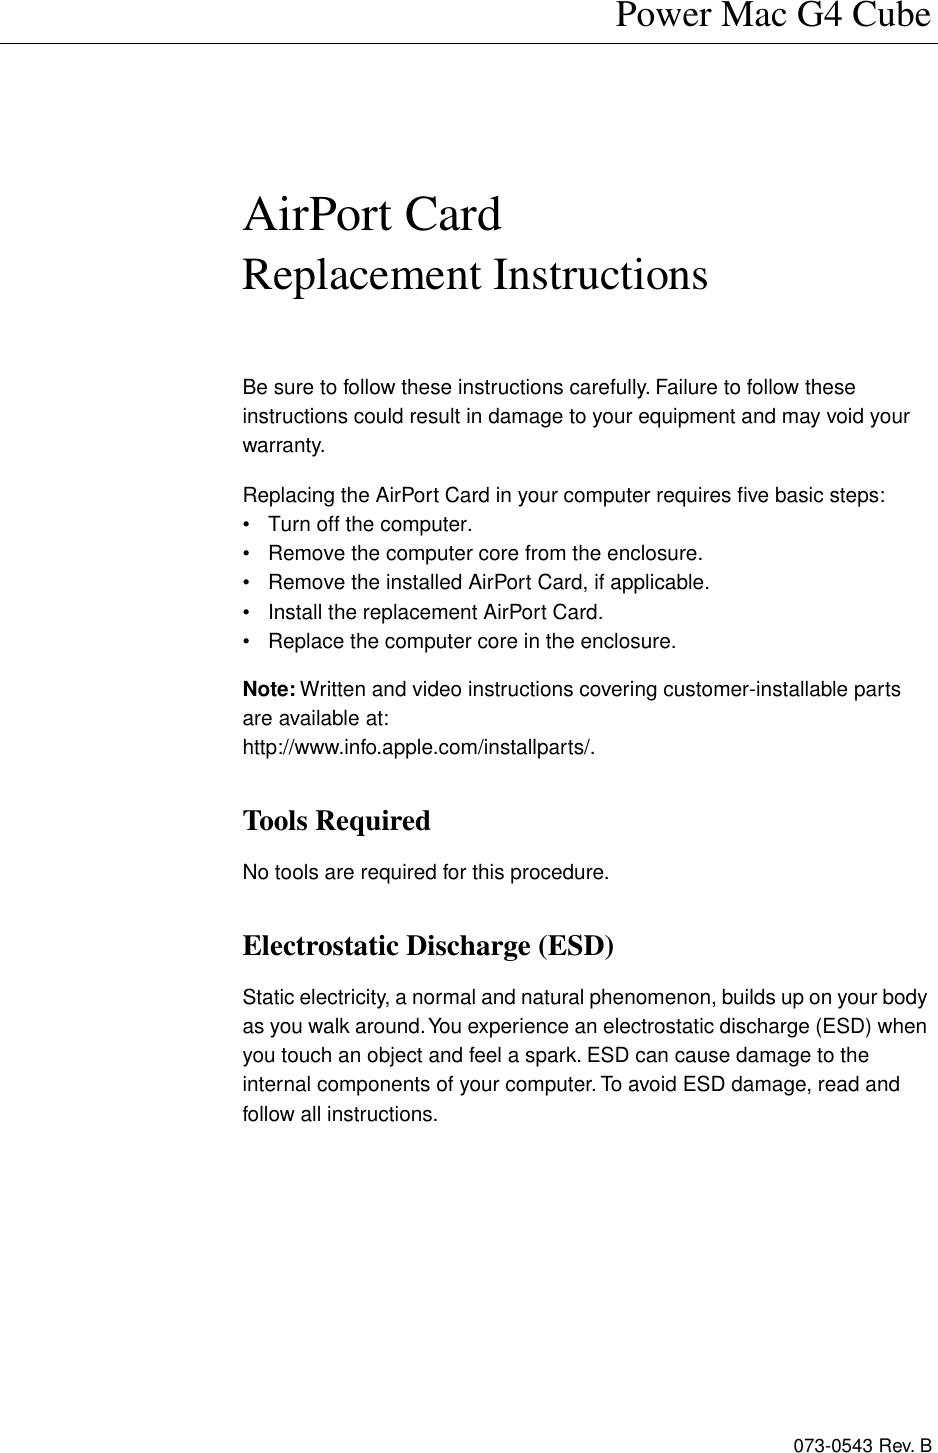 Page 1 of 6 - Apple PowerMacG4(Cube) User Manual Power Mac G4Cube-Air Port Card Replacement Instructions Airport.cube